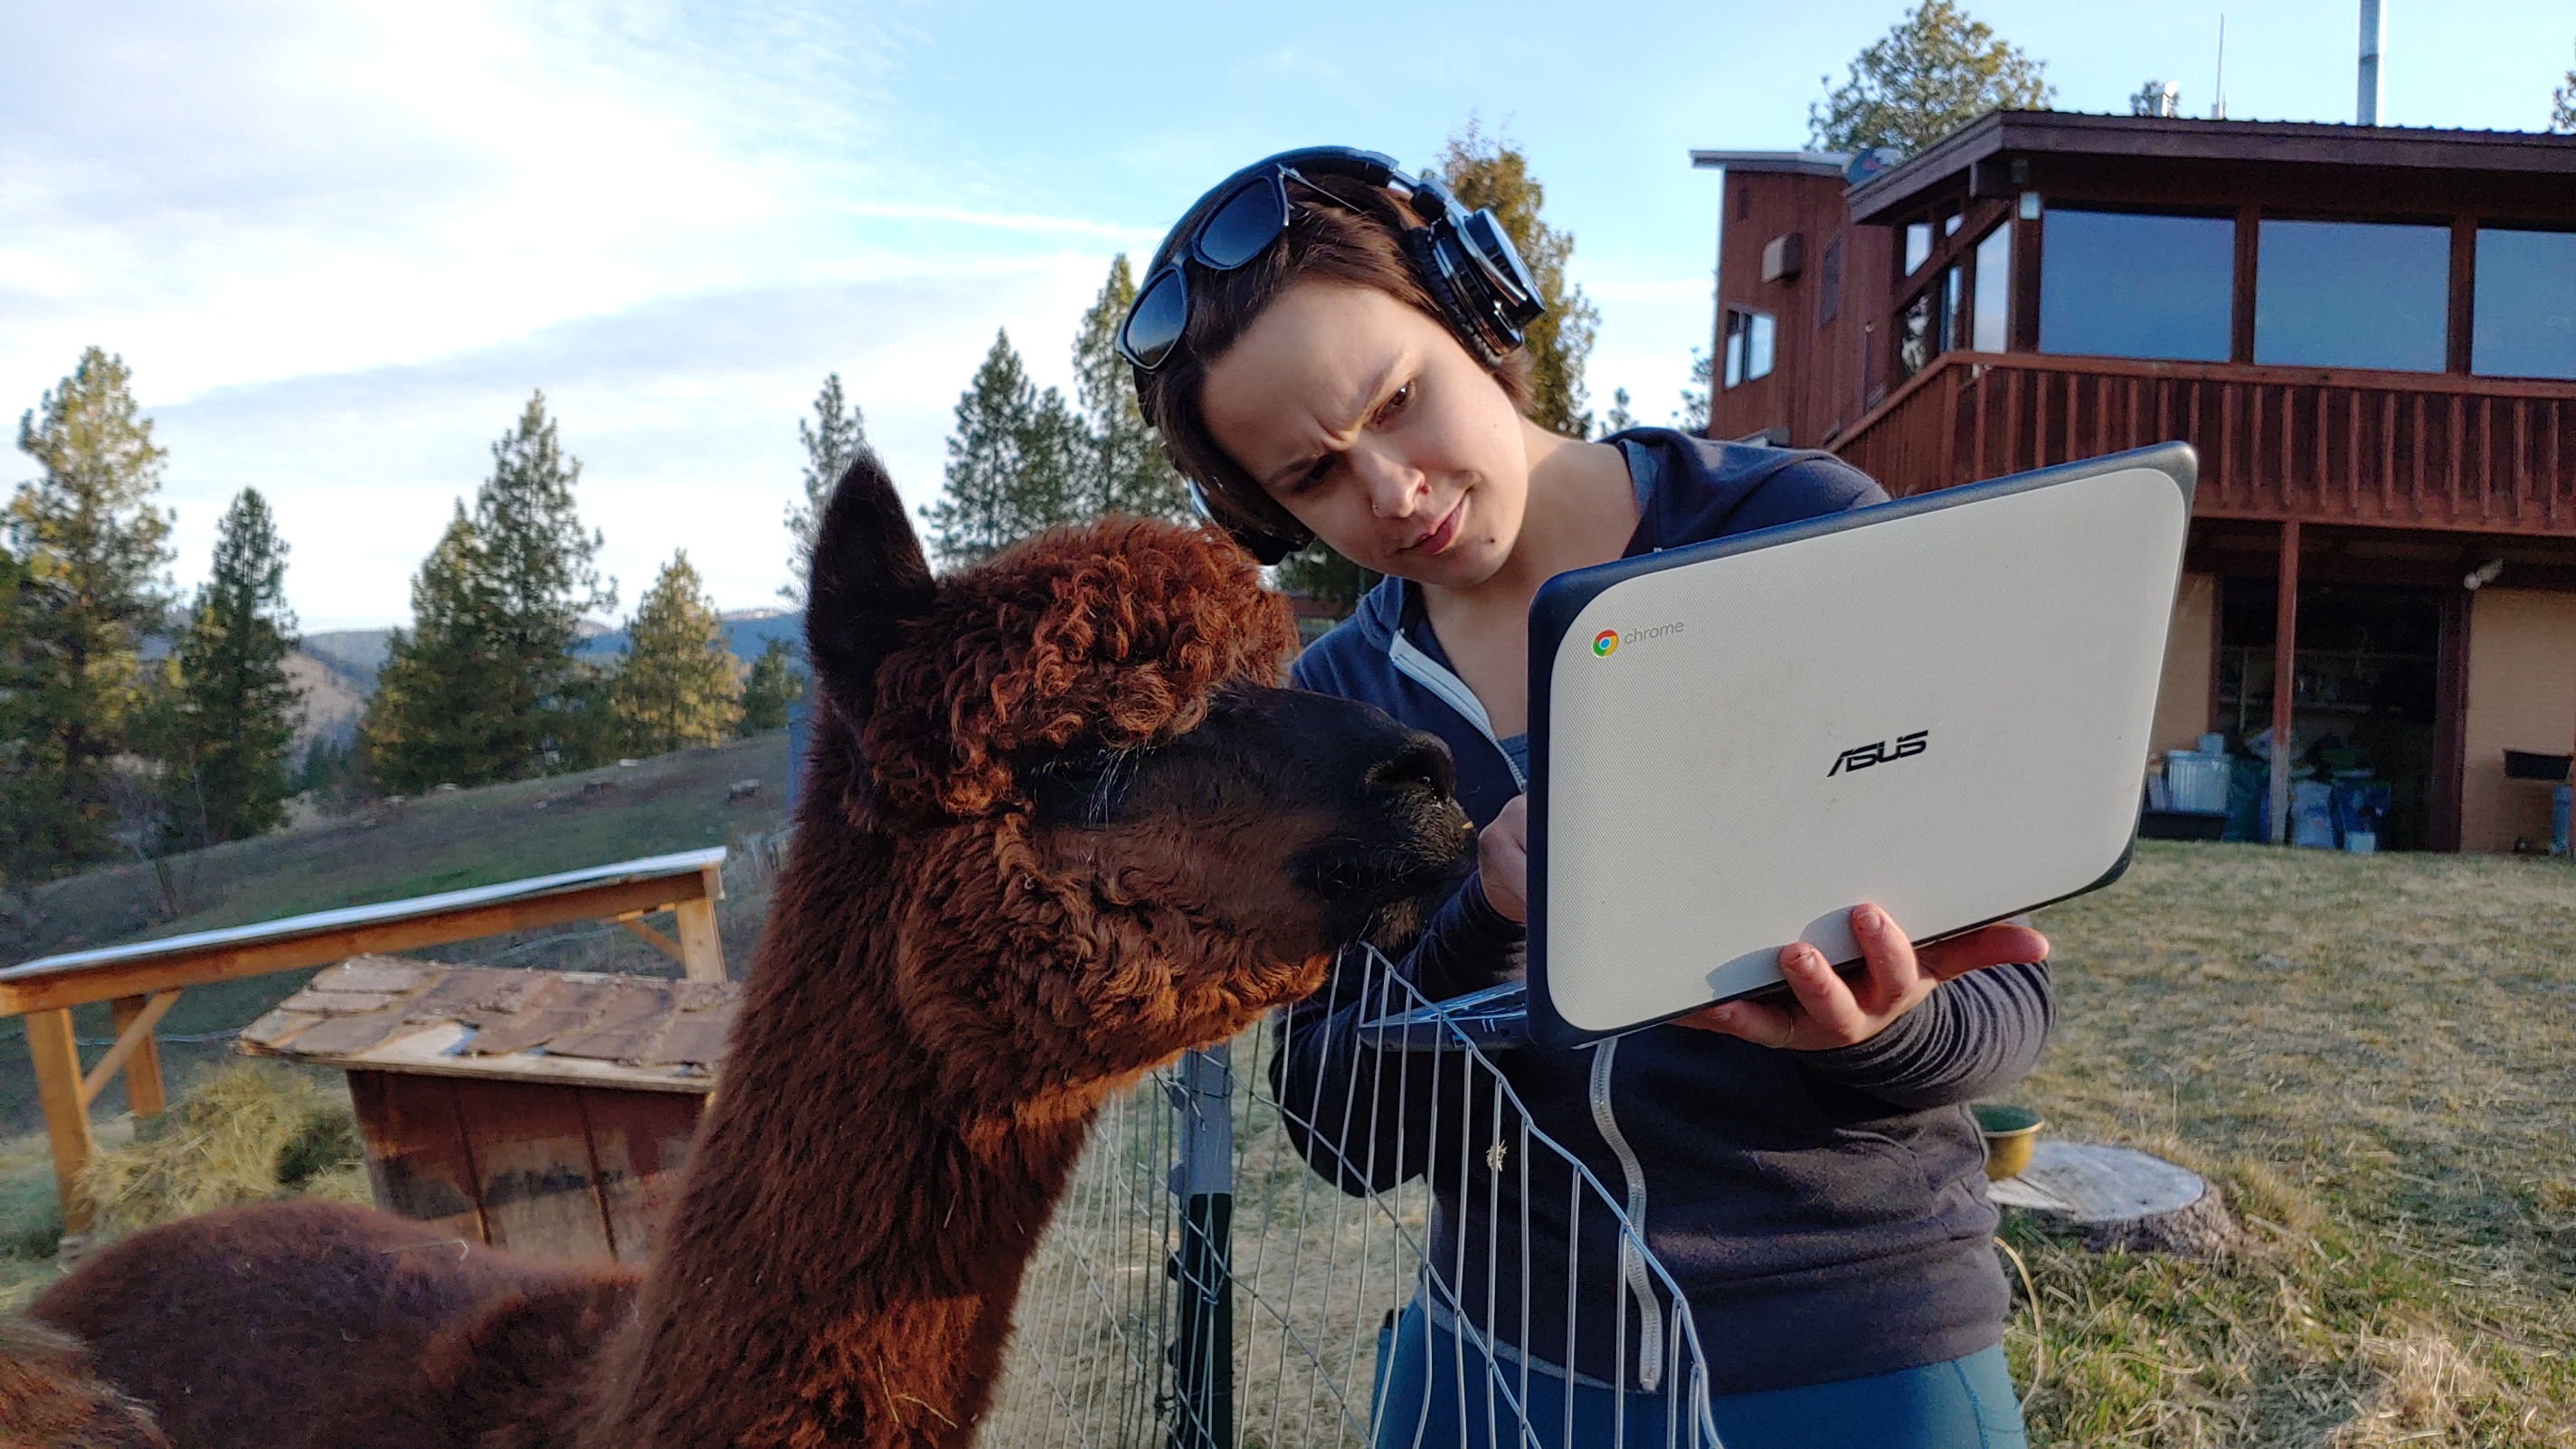 Broadus the Alpaca occasionally consults Anna on her work